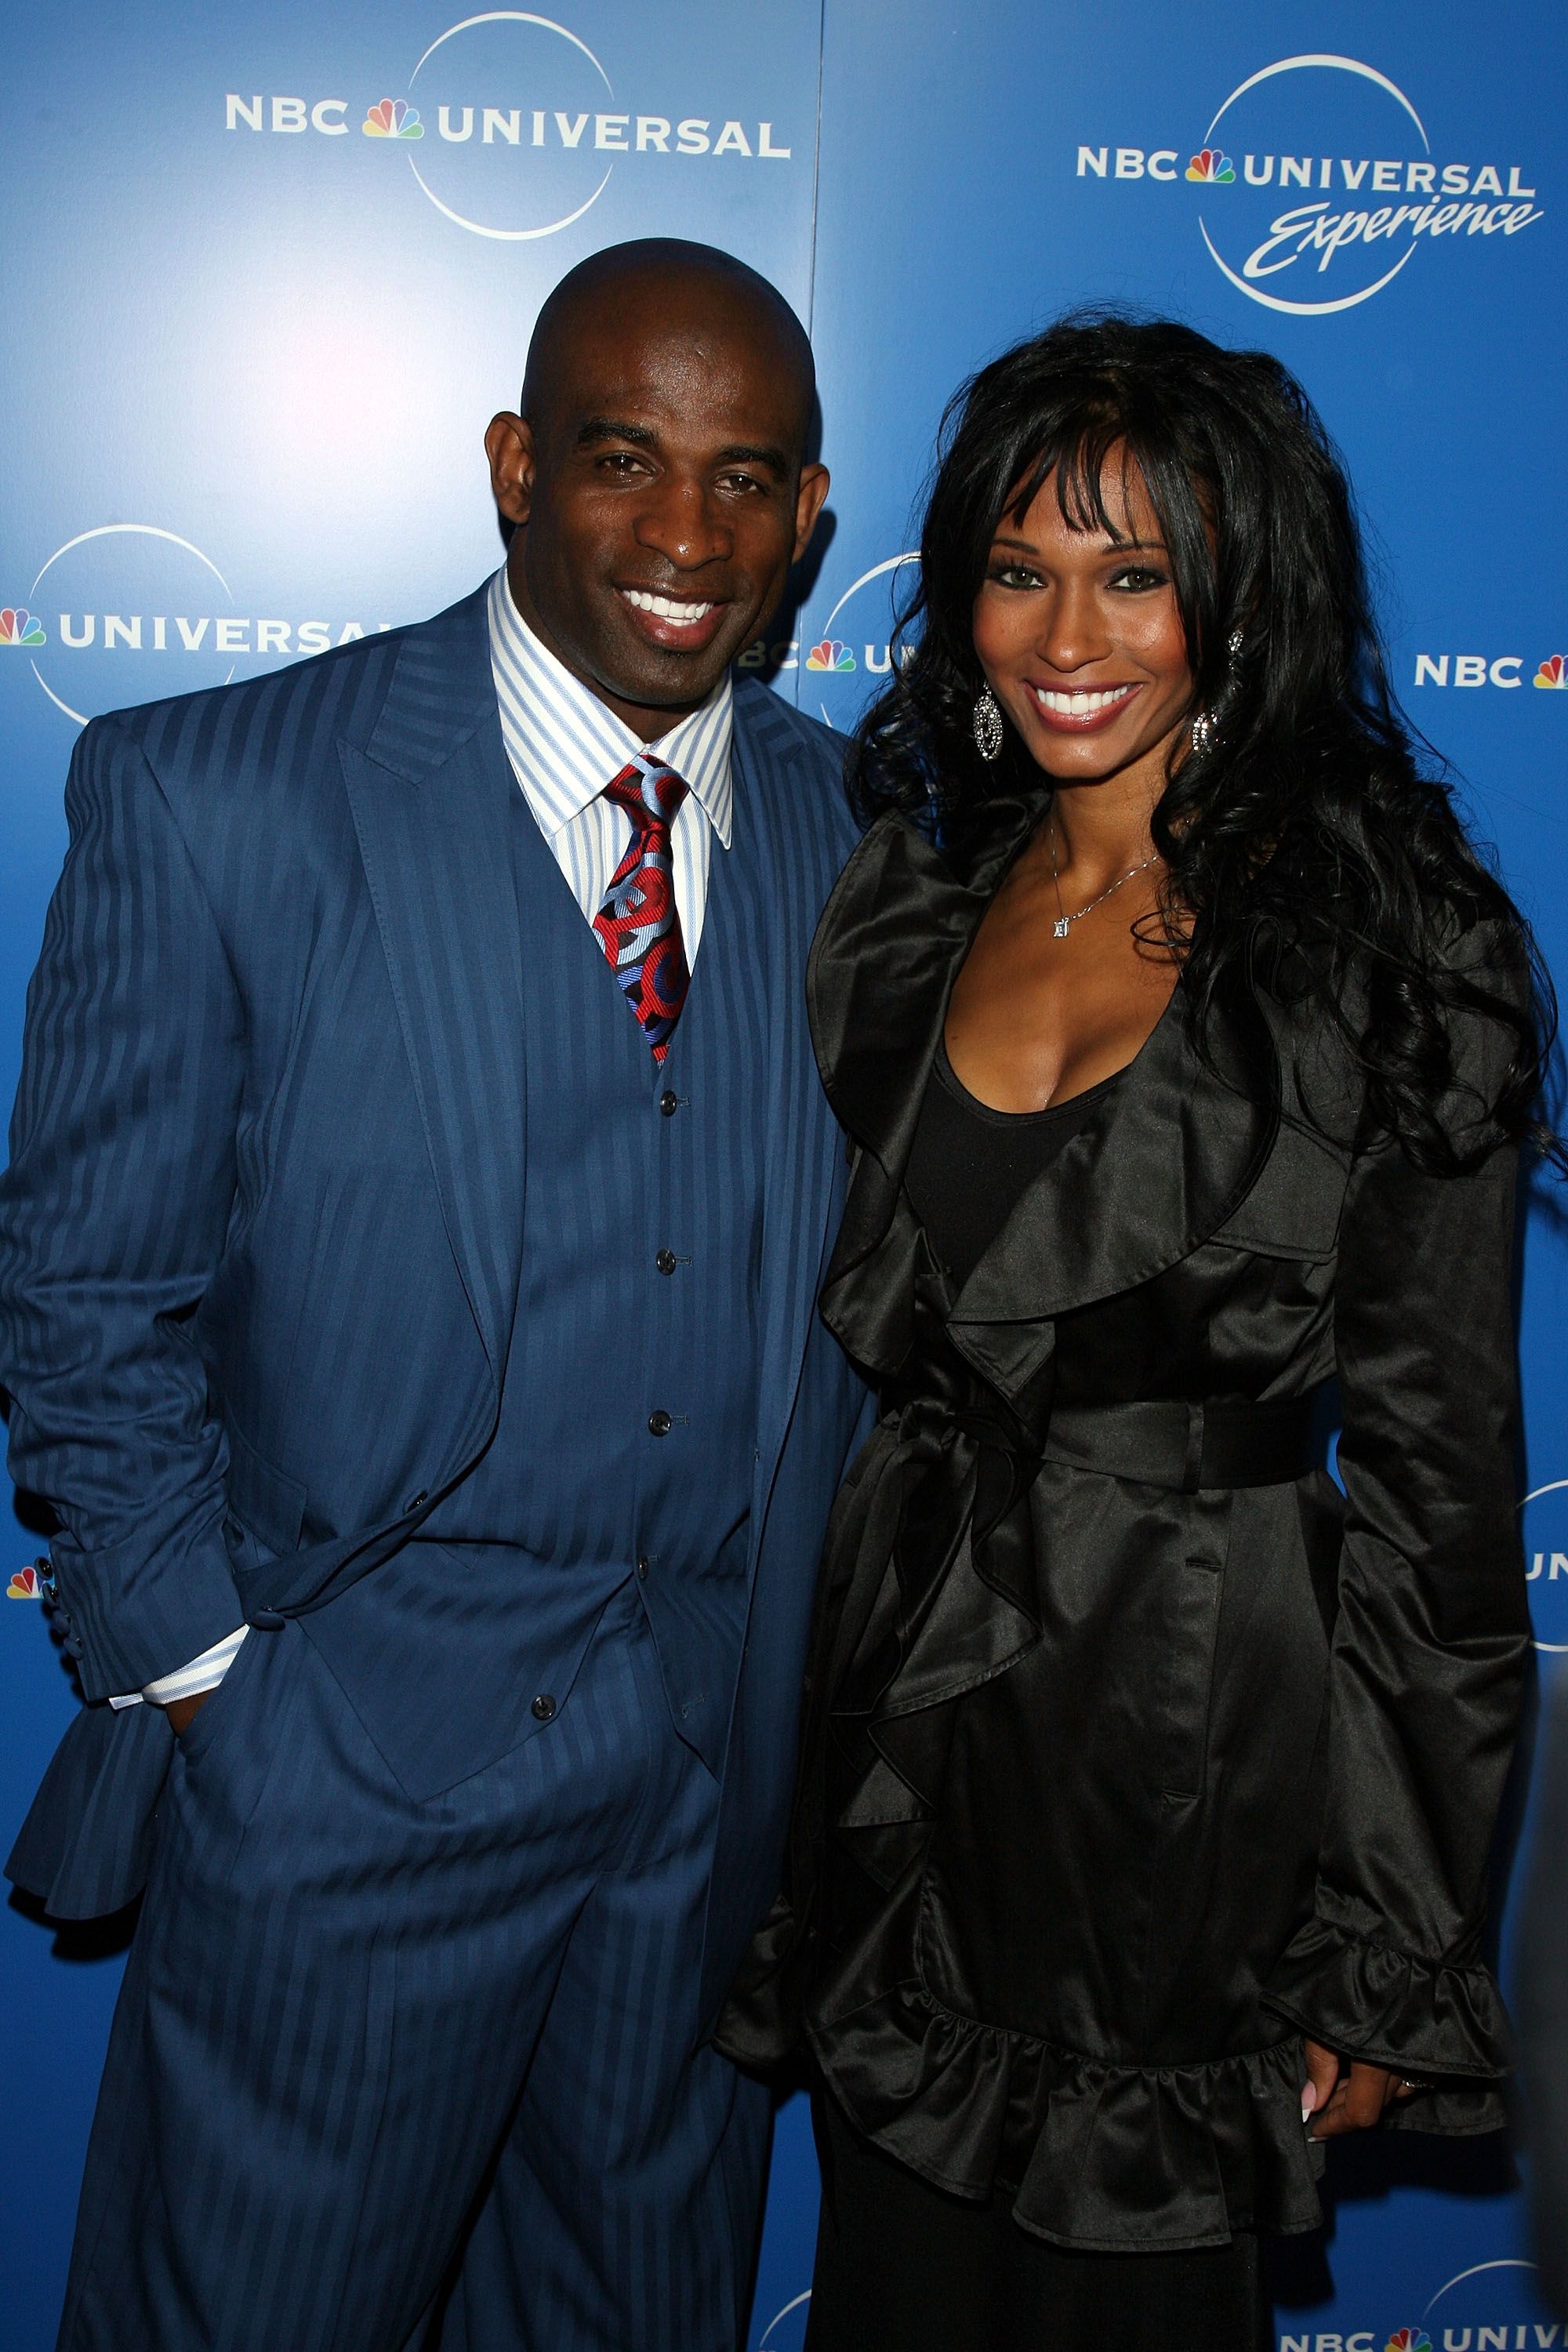 Deion Sanders and Pilar Biggers at NBC Universal Experience at Rockefeller Center on May 12, 2008 in New York City. | Photo: Getty Images